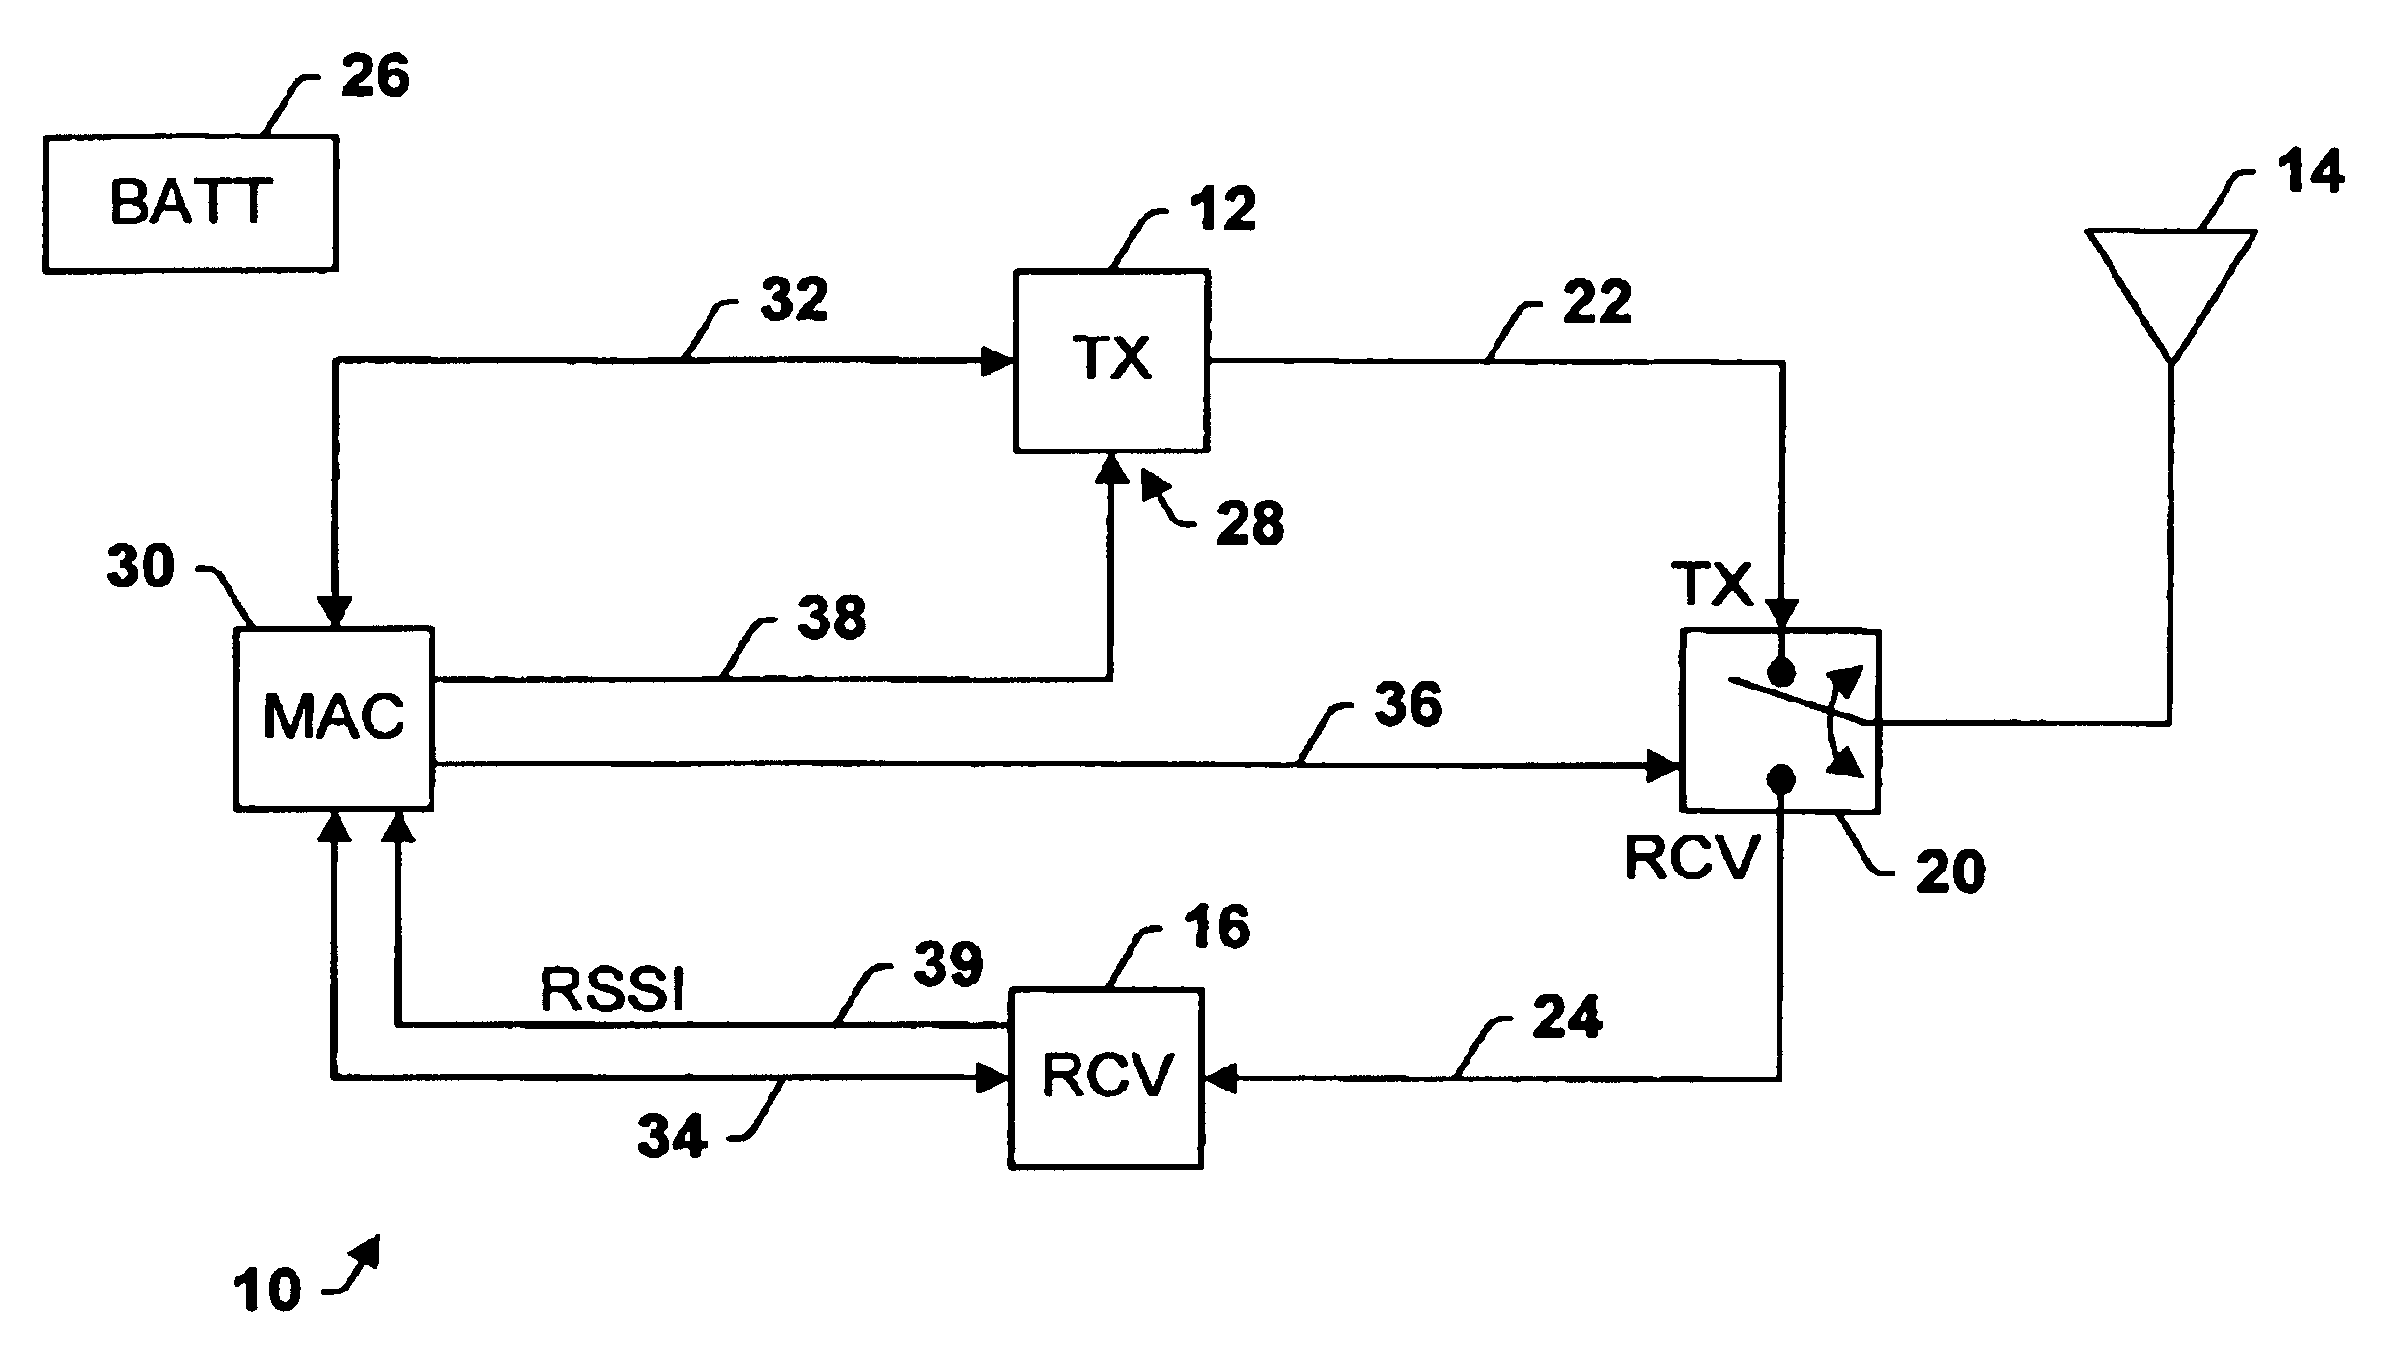 Transceiver control with sleep mode operation